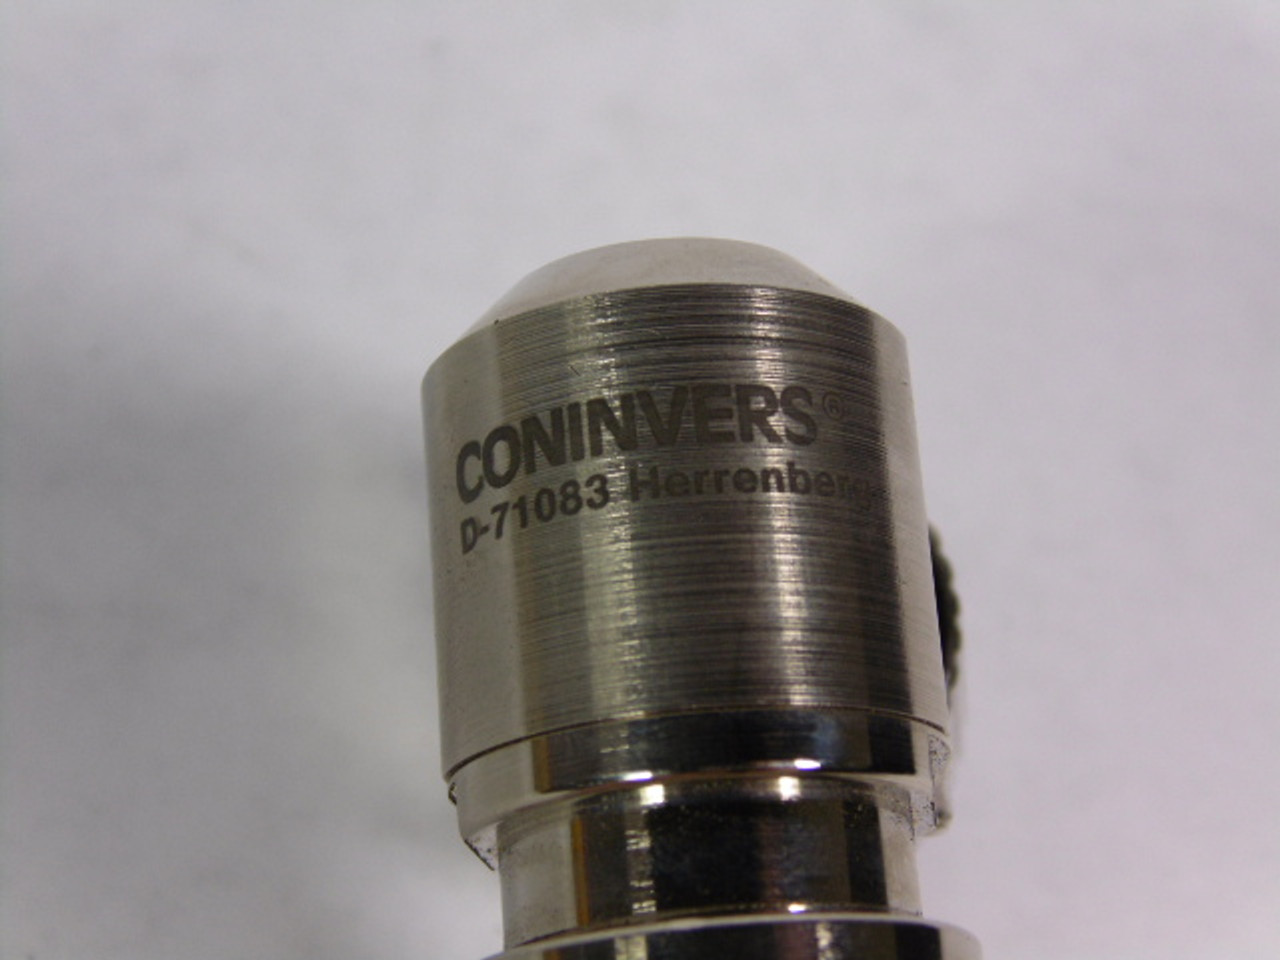 Coninvers D-71083 Connector 12 PIN Female Signal Connector USED